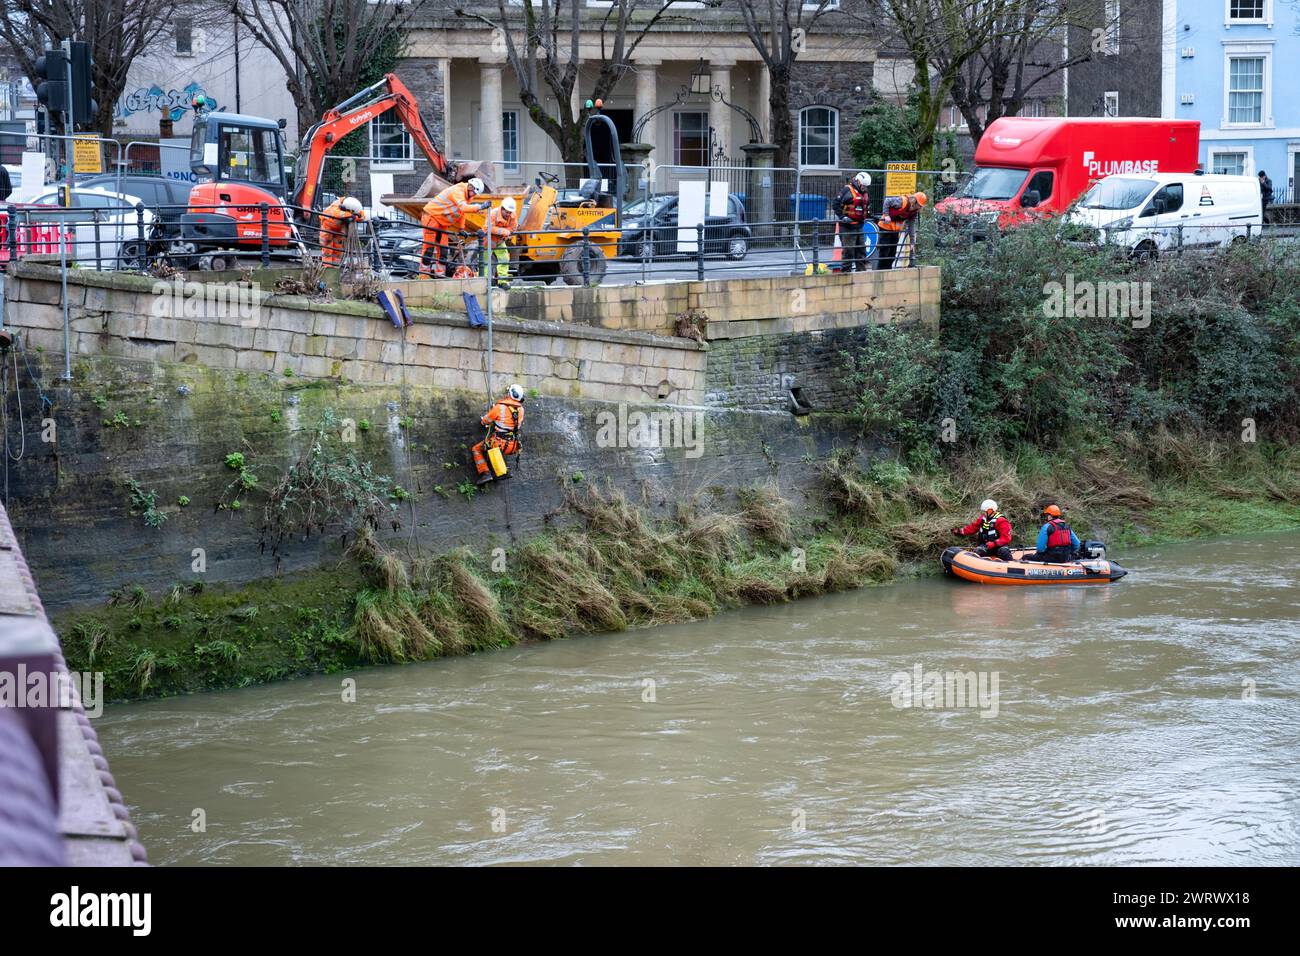 Bristol, UK. Workman carrying out repairs to a river wall on the River Avon New Cut as part of the city councils river walls stabilisation project Stock Photo